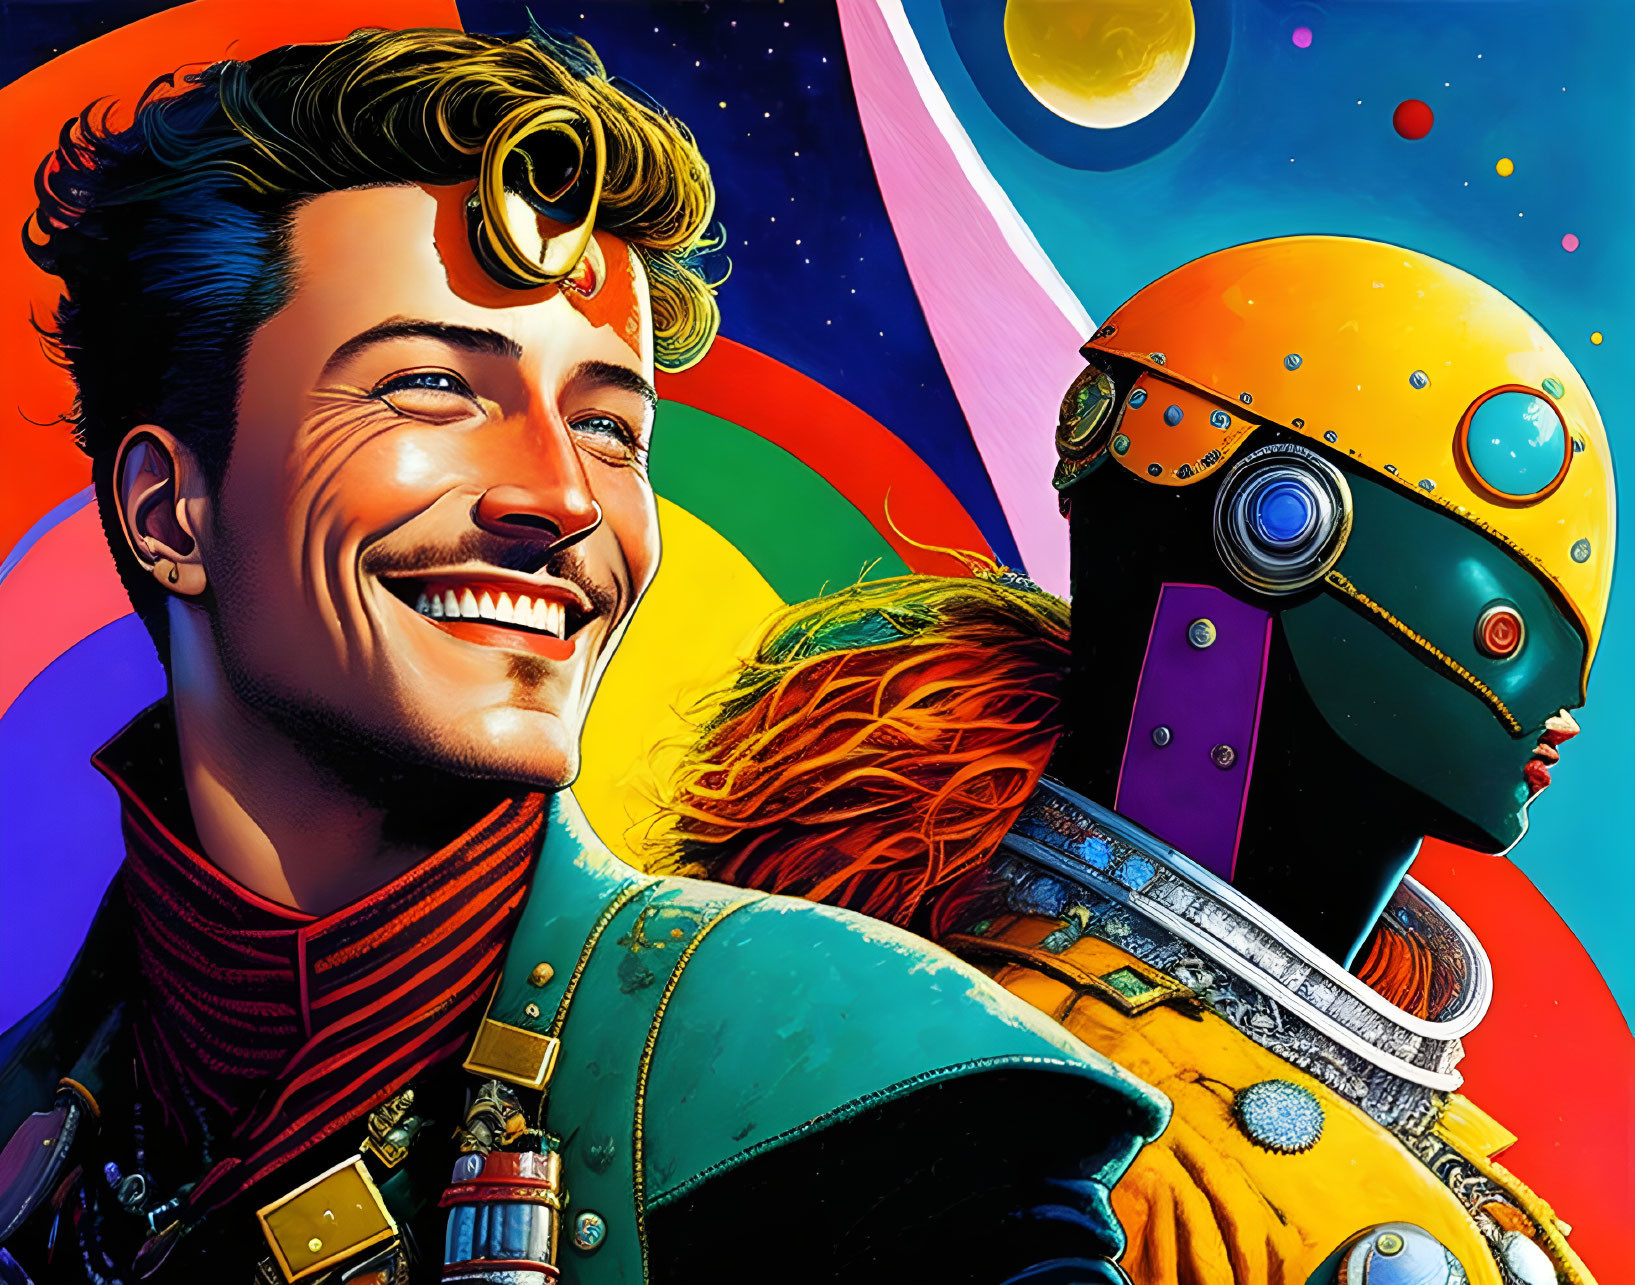 Smiling man with cybernetic eye implant and humanoid robot in space-themed setting